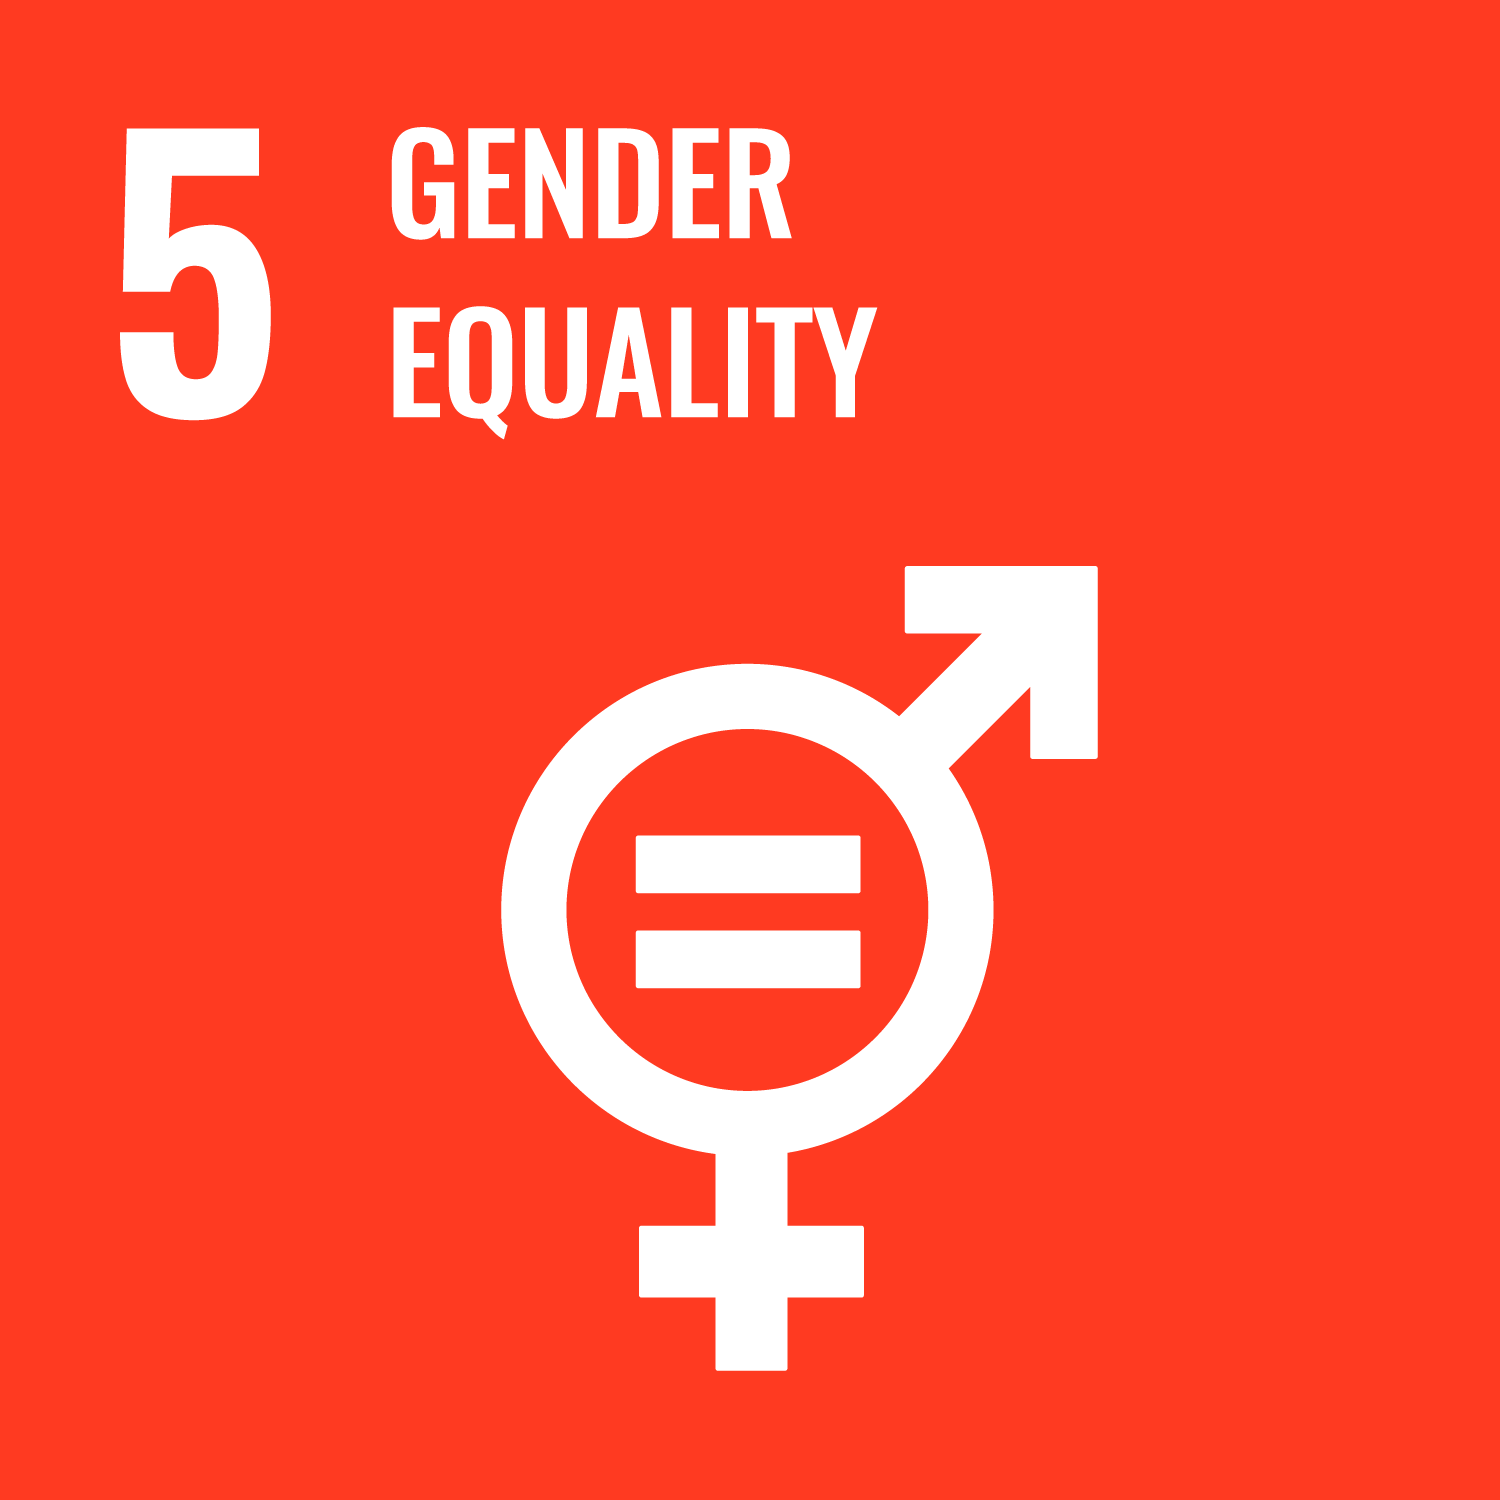 Achieve gender equality and empower all women and girls 